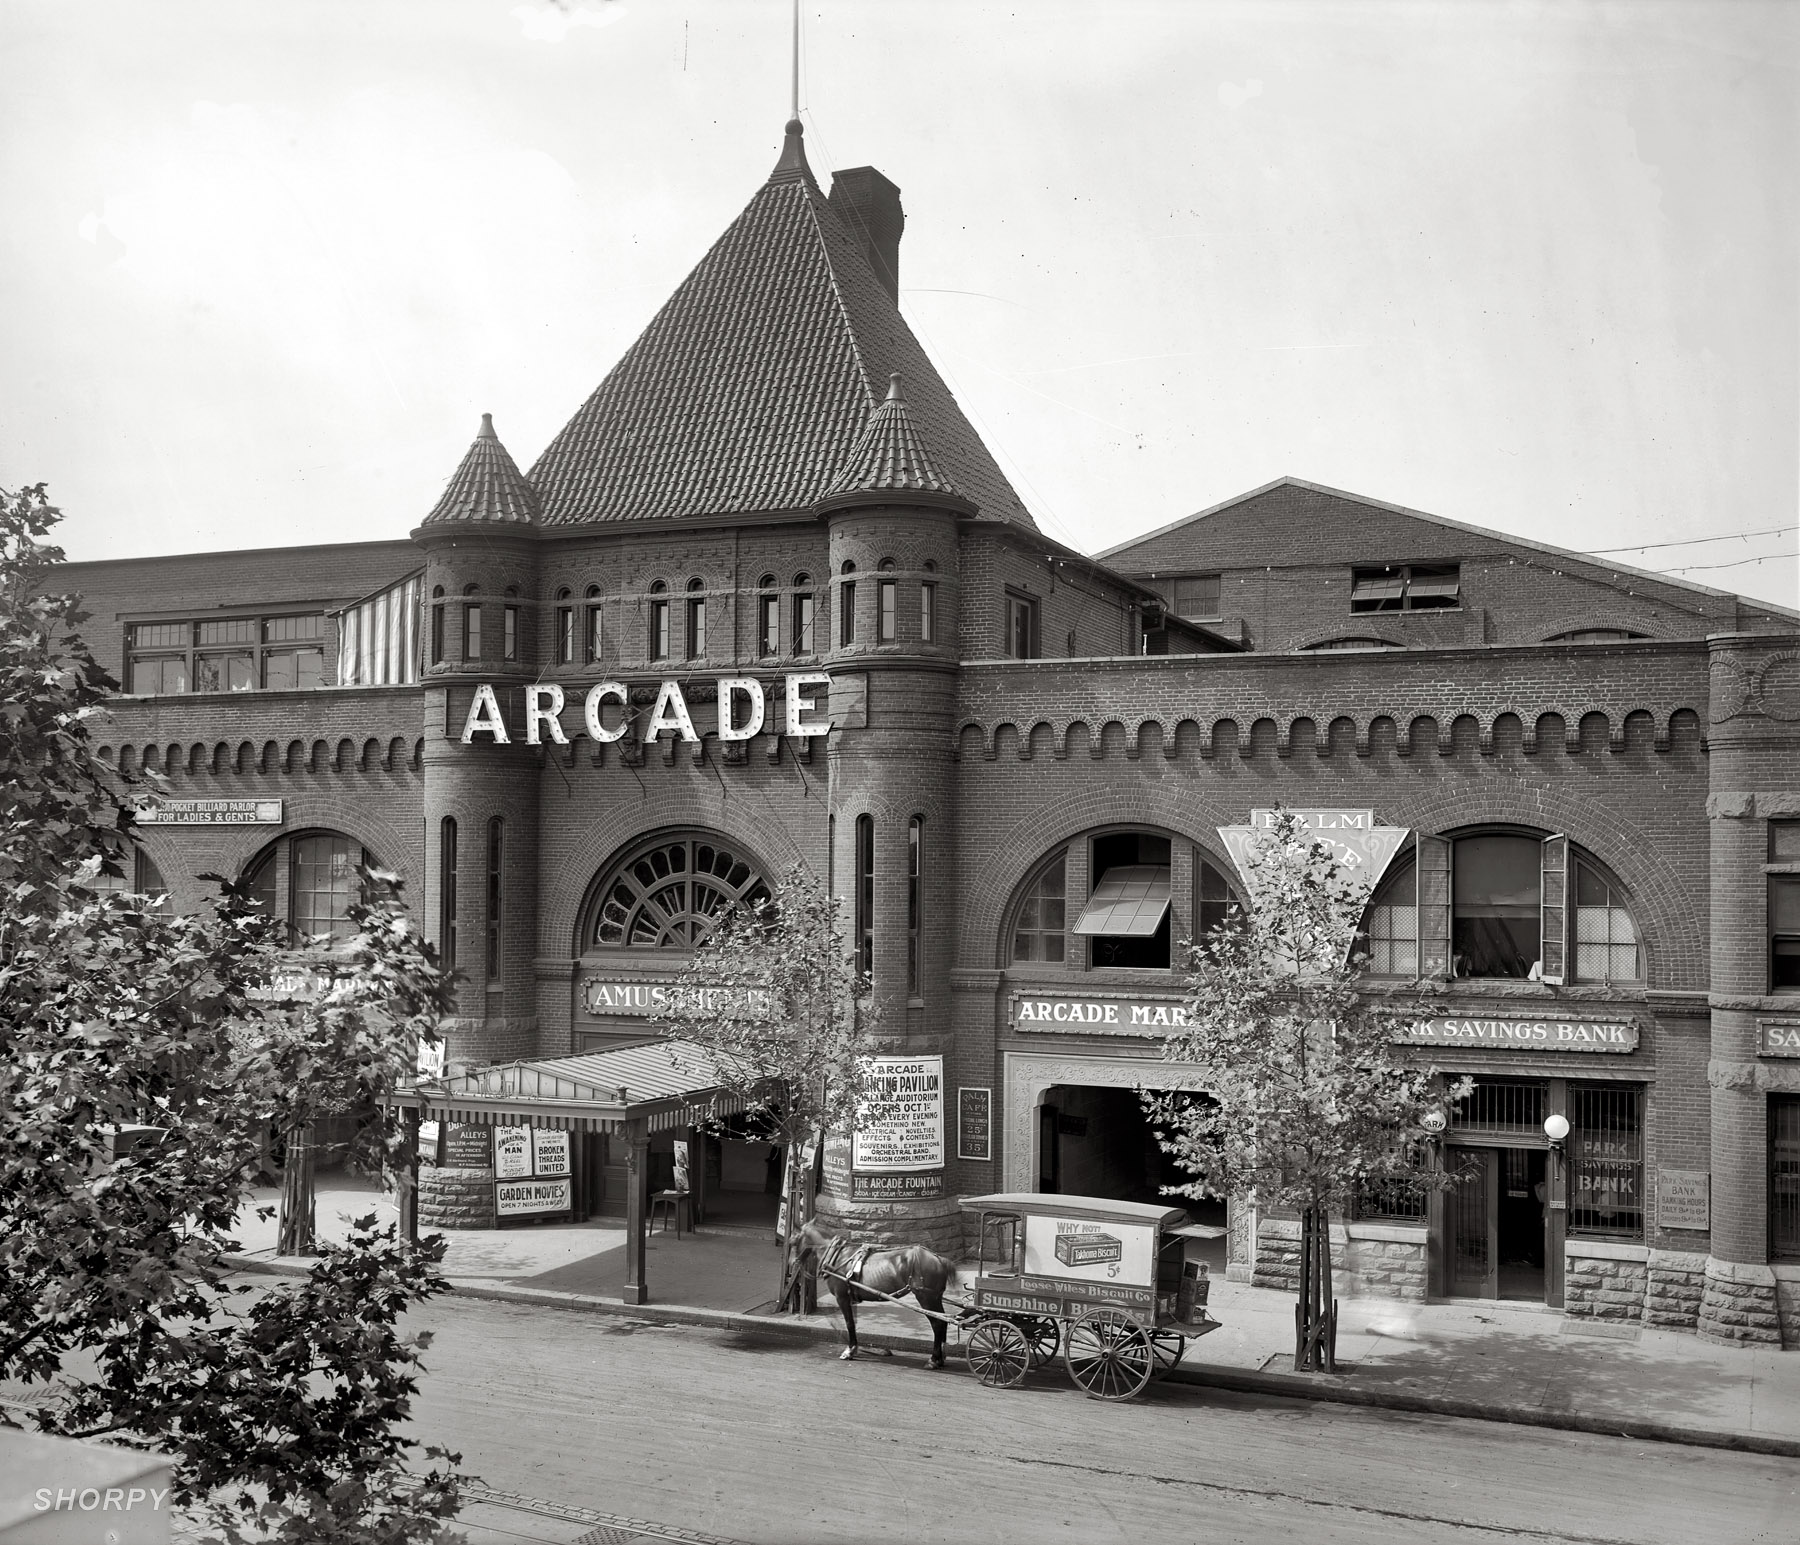 "Arcade Market." The Arcade building in Washington circa 1913, with "garden movies," bowling, billiards, dance pavilion, cafe, soda fountain and who knows what other fun stuff. National Photo Company glass negative. View full size.